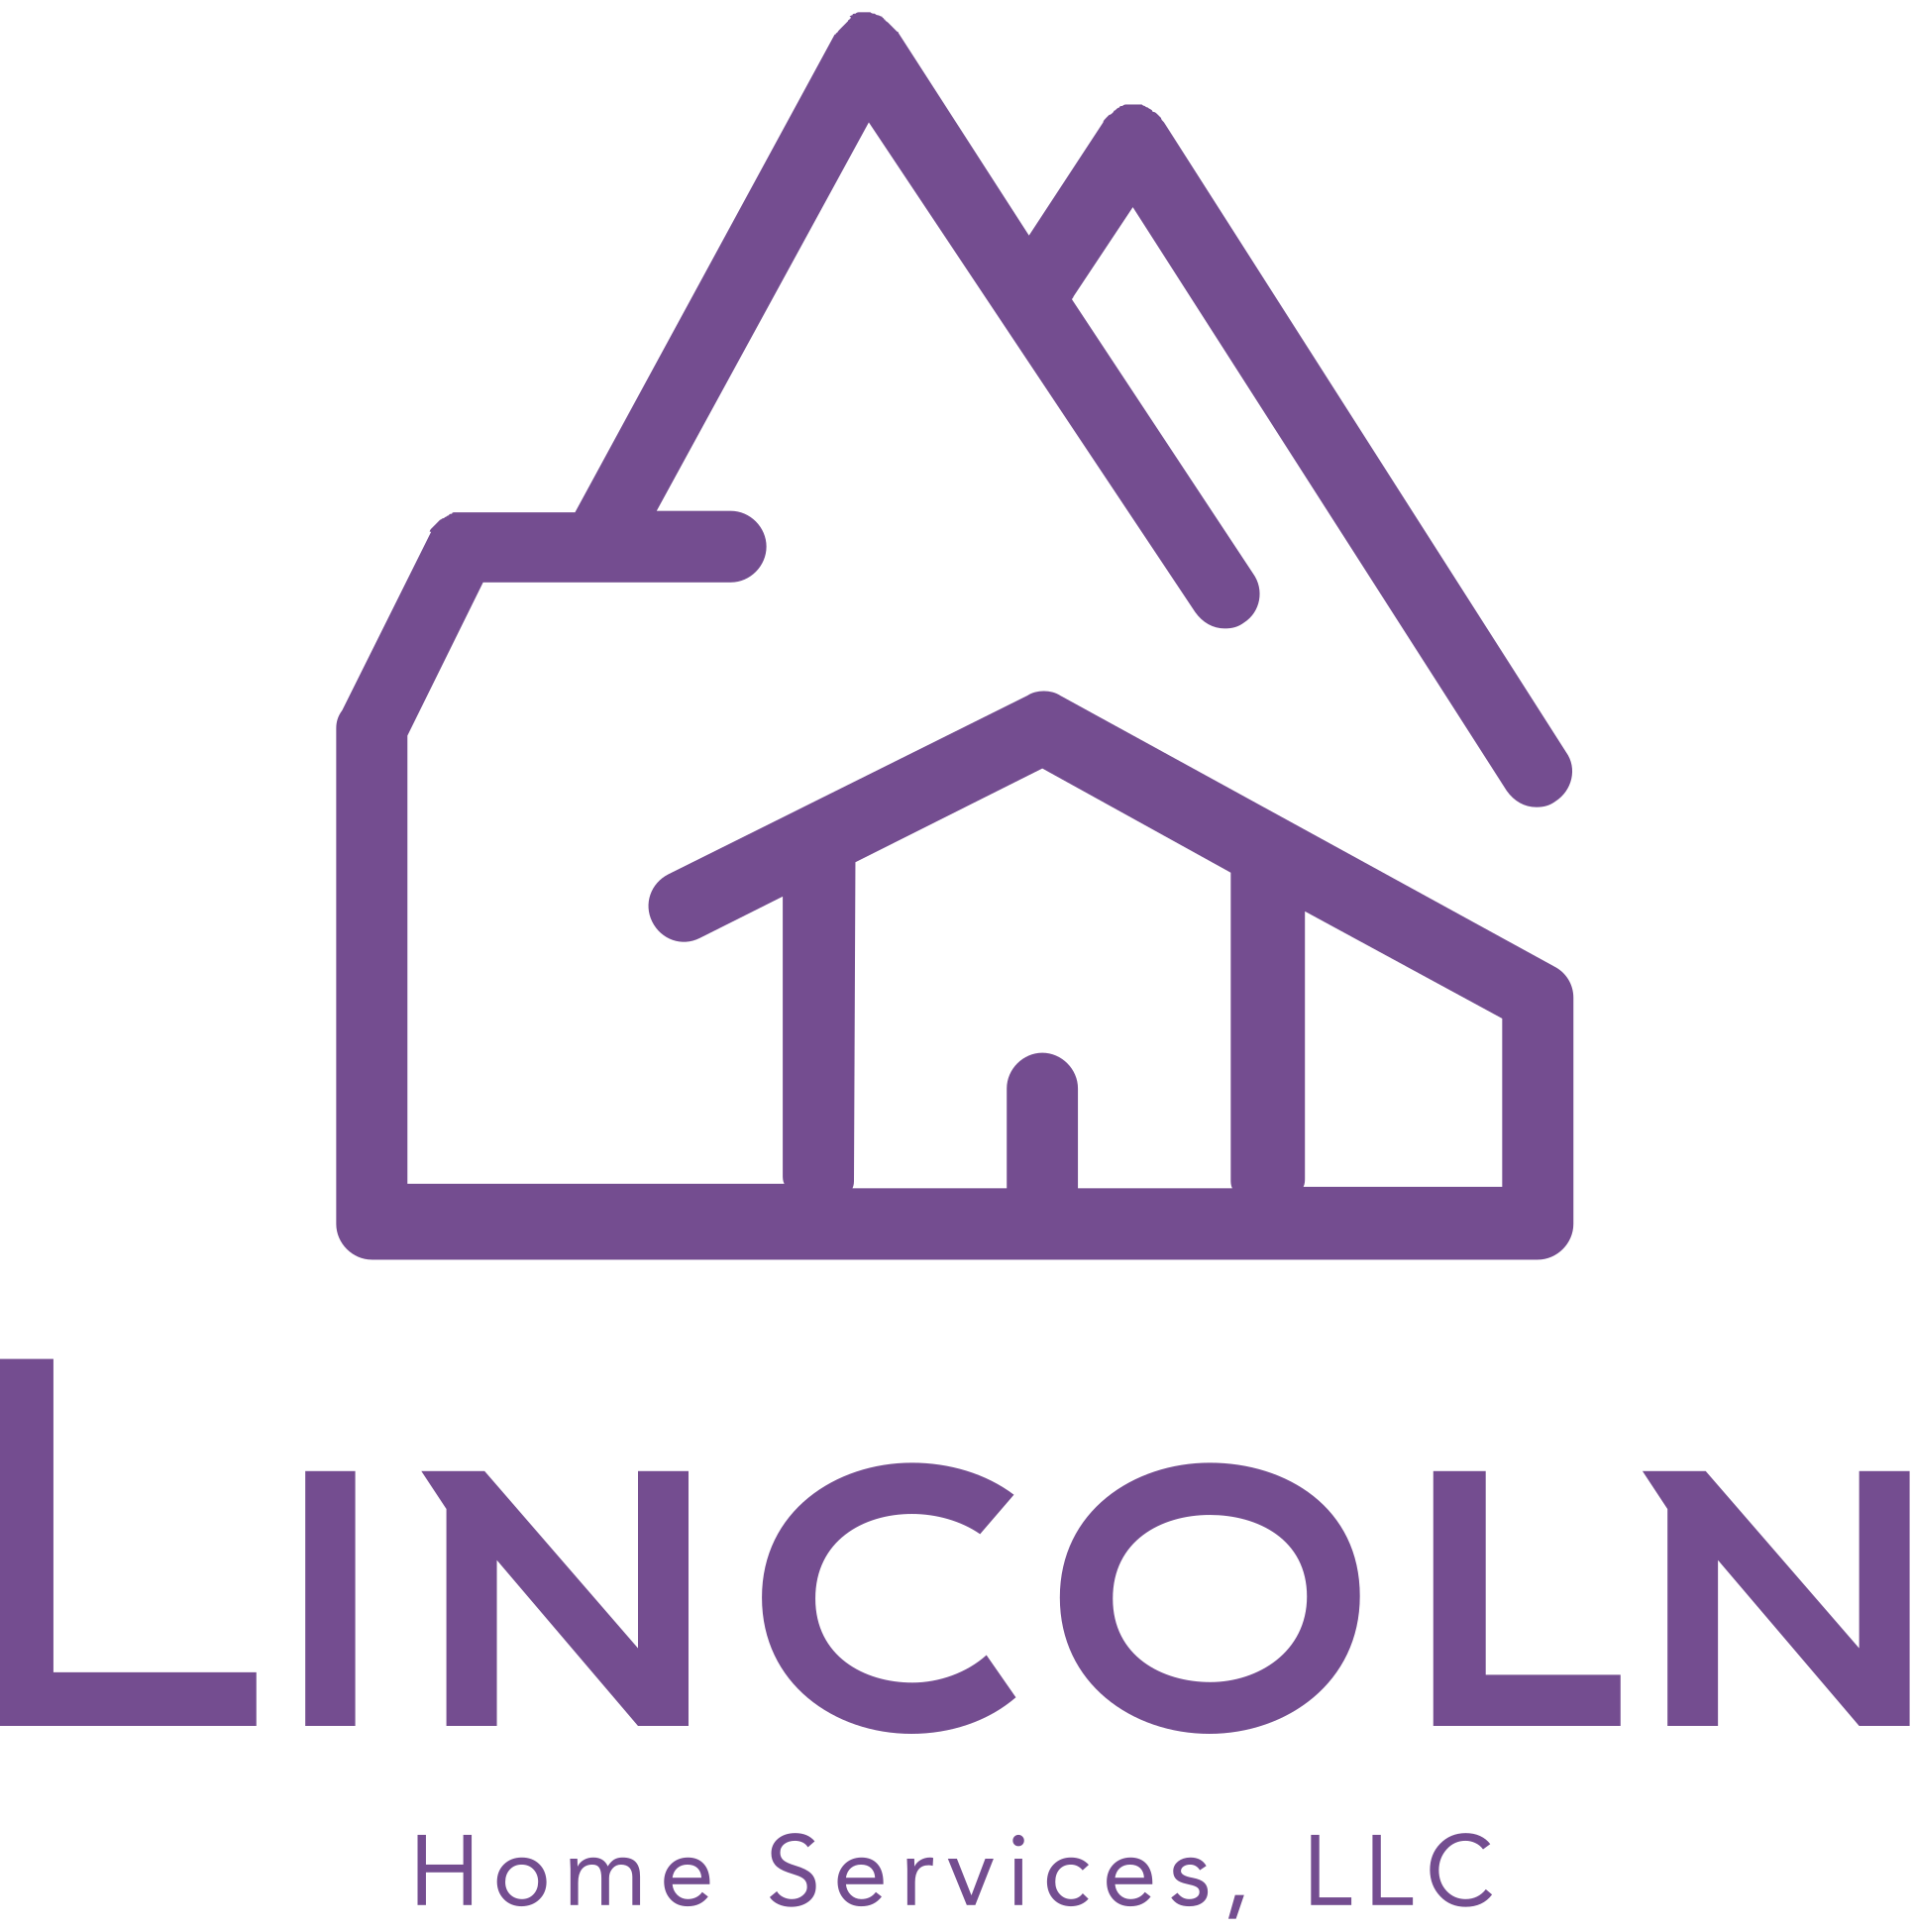 Lincoln Home Services